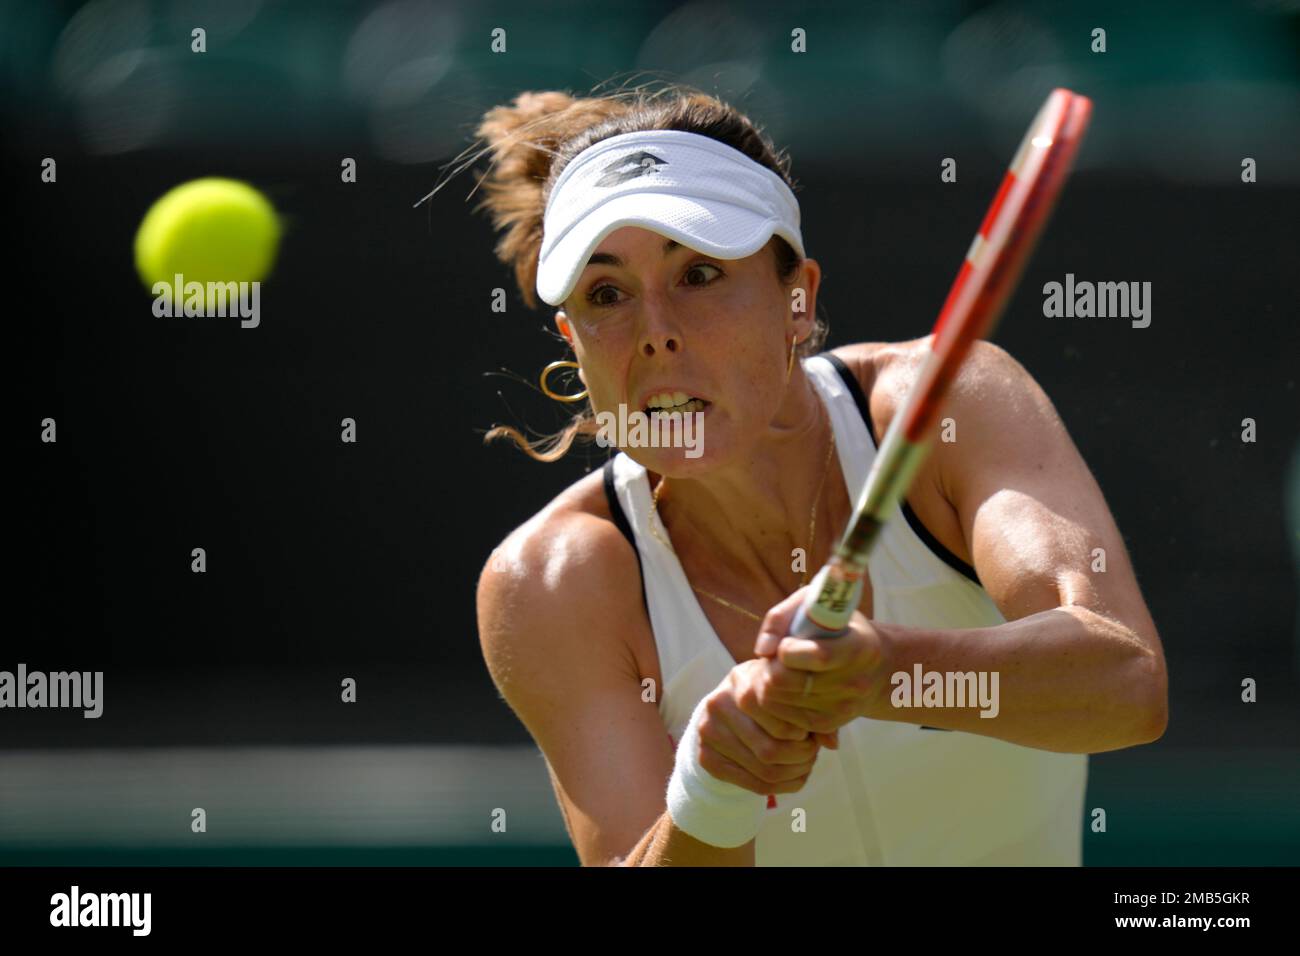 Frances Alize Cornet returns the ball to Polands Iga Swiatek during a third round womens singles match on day six of the Wimbledon tennis championships in London, Saturday, July 2, 2022